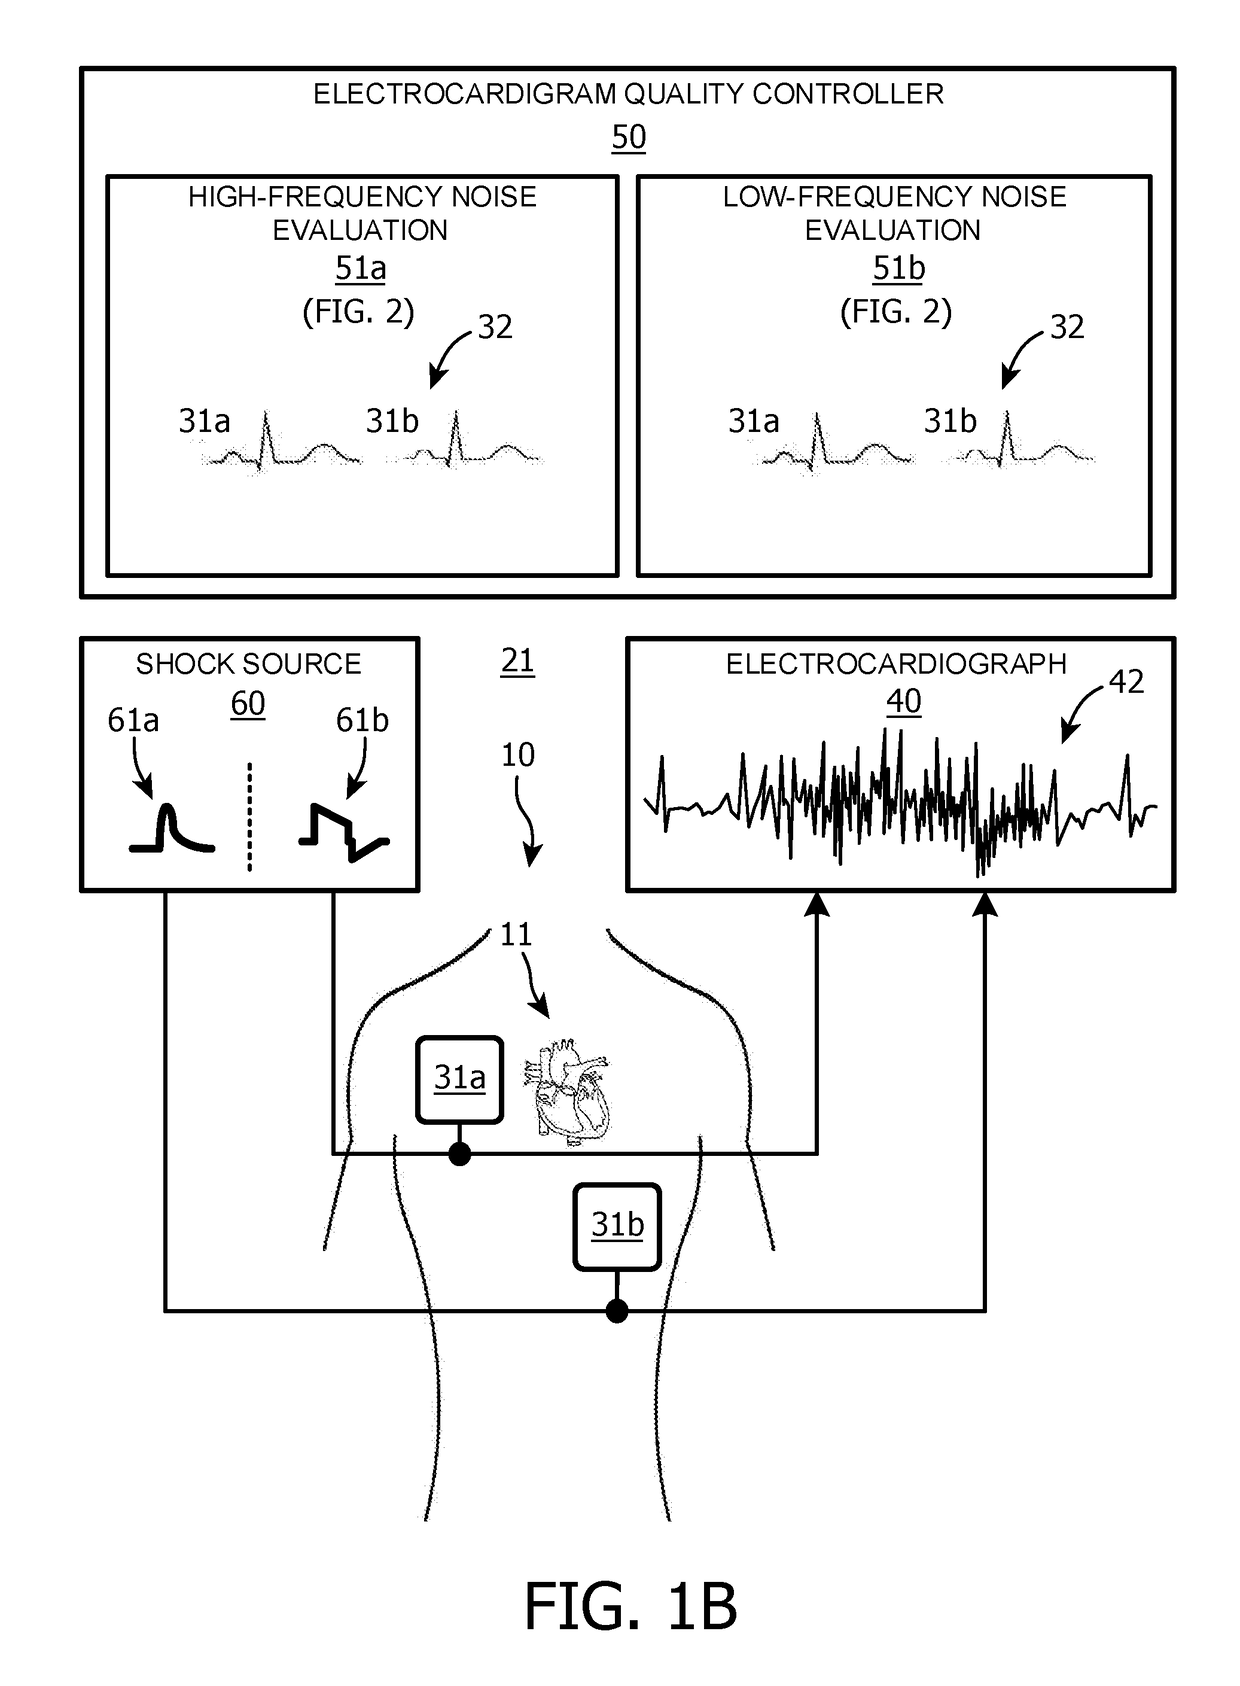 High/low frequency signal quality evaluations of ECG lead signals